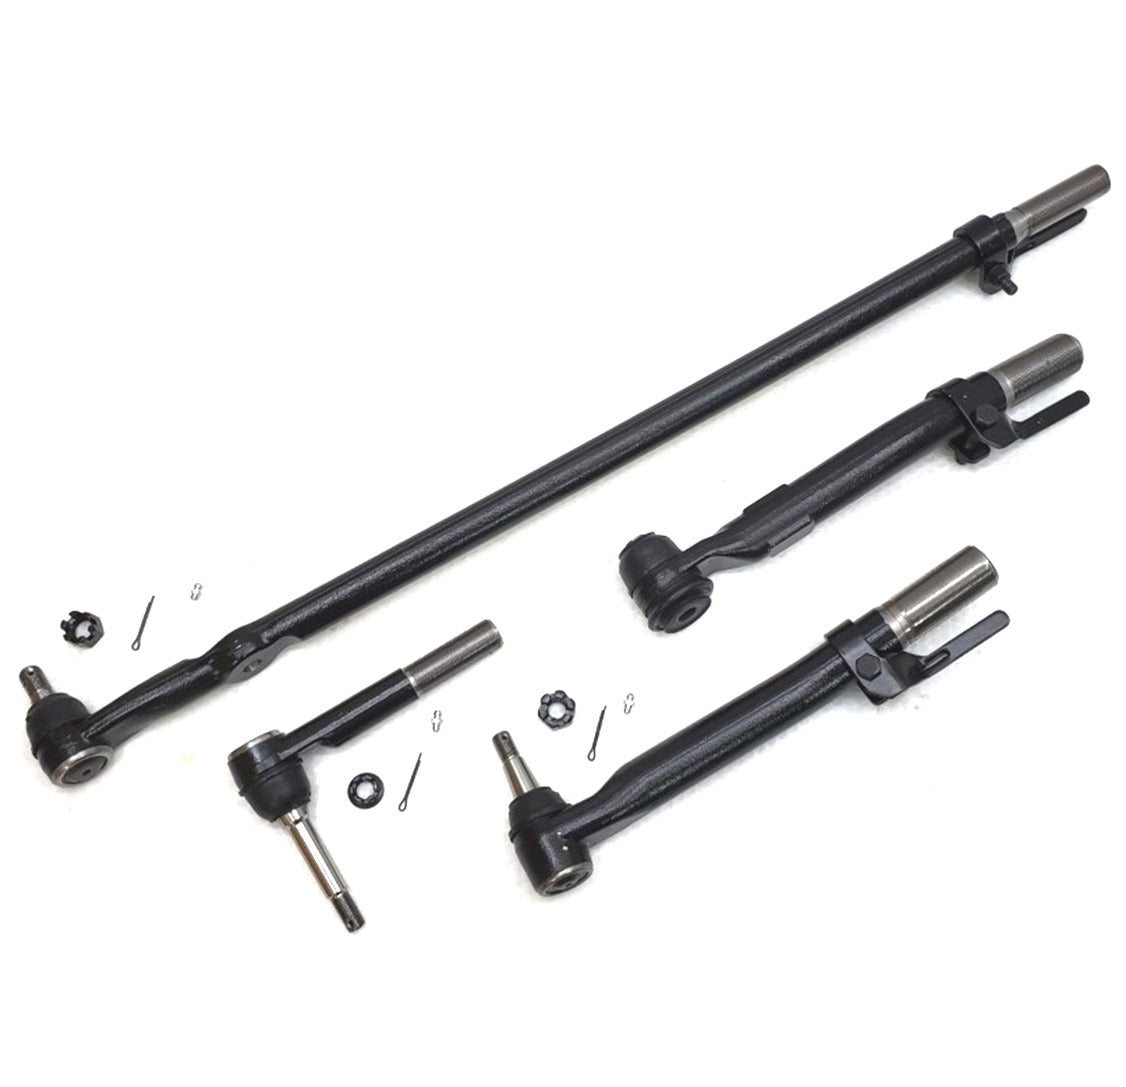 HD Tie Rod Drag Link Steering Kit for 2008-2010 Ford F250, F350 4x4